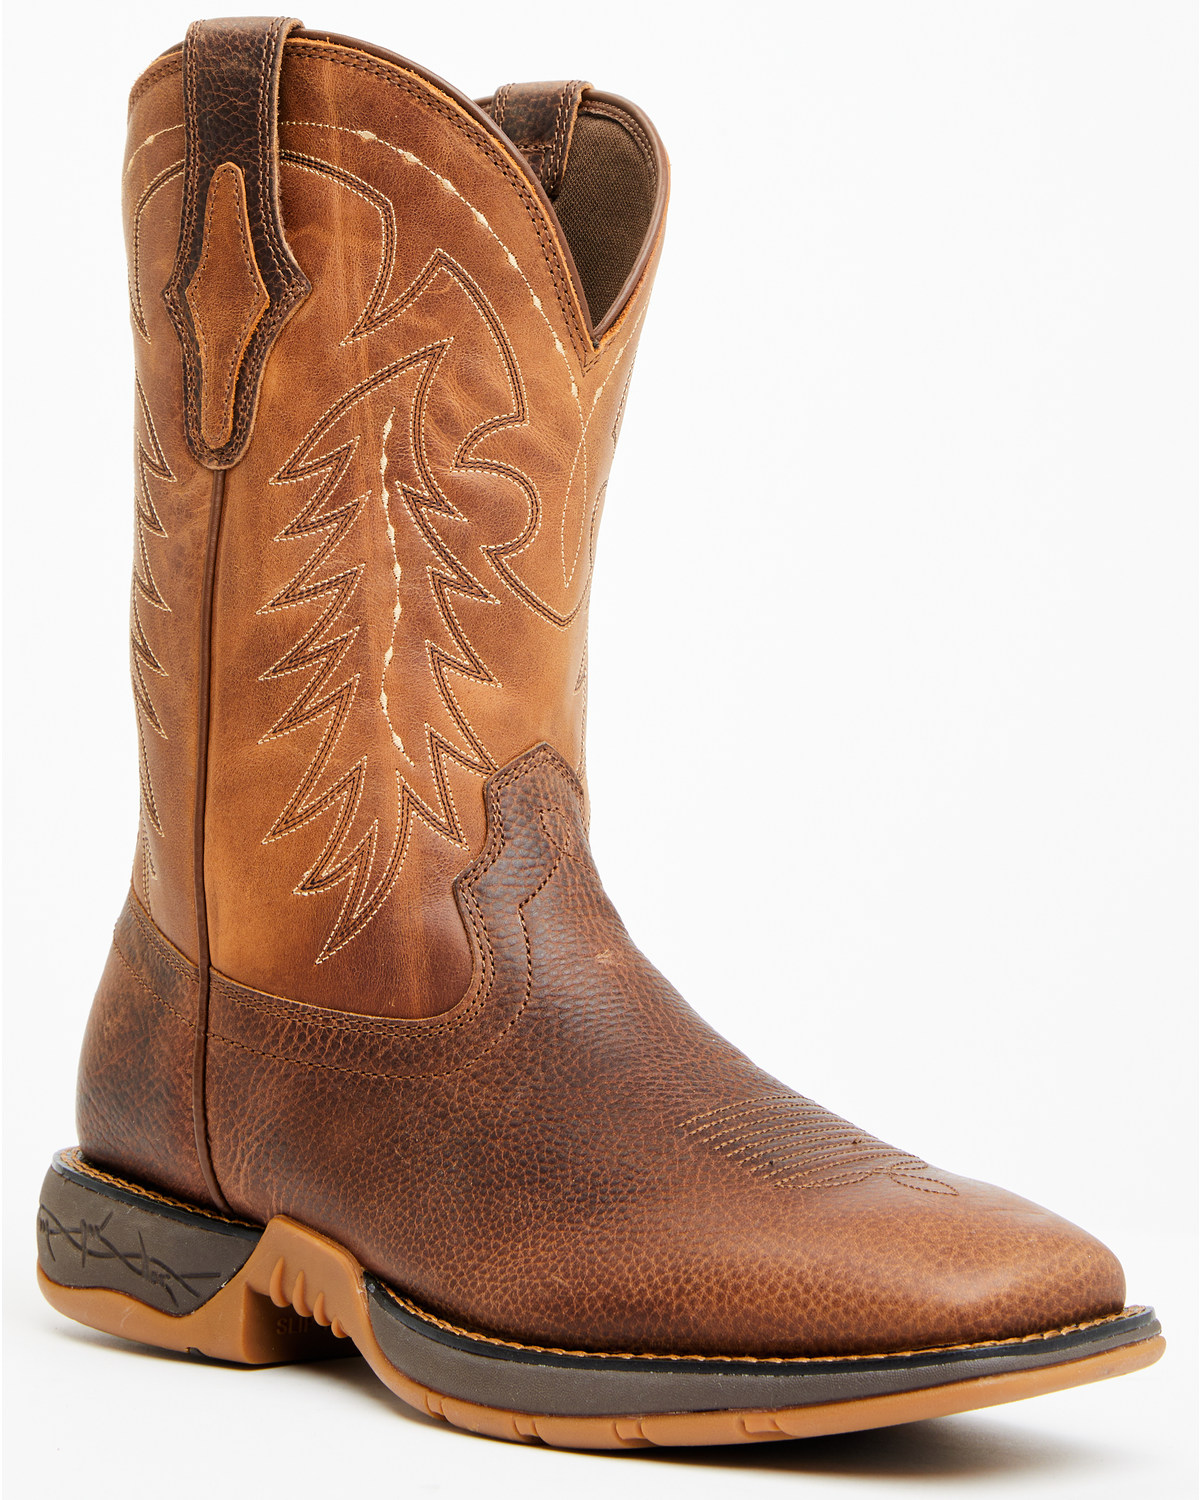 Cody James Men's Summit Lite Performance Western Boots - Square